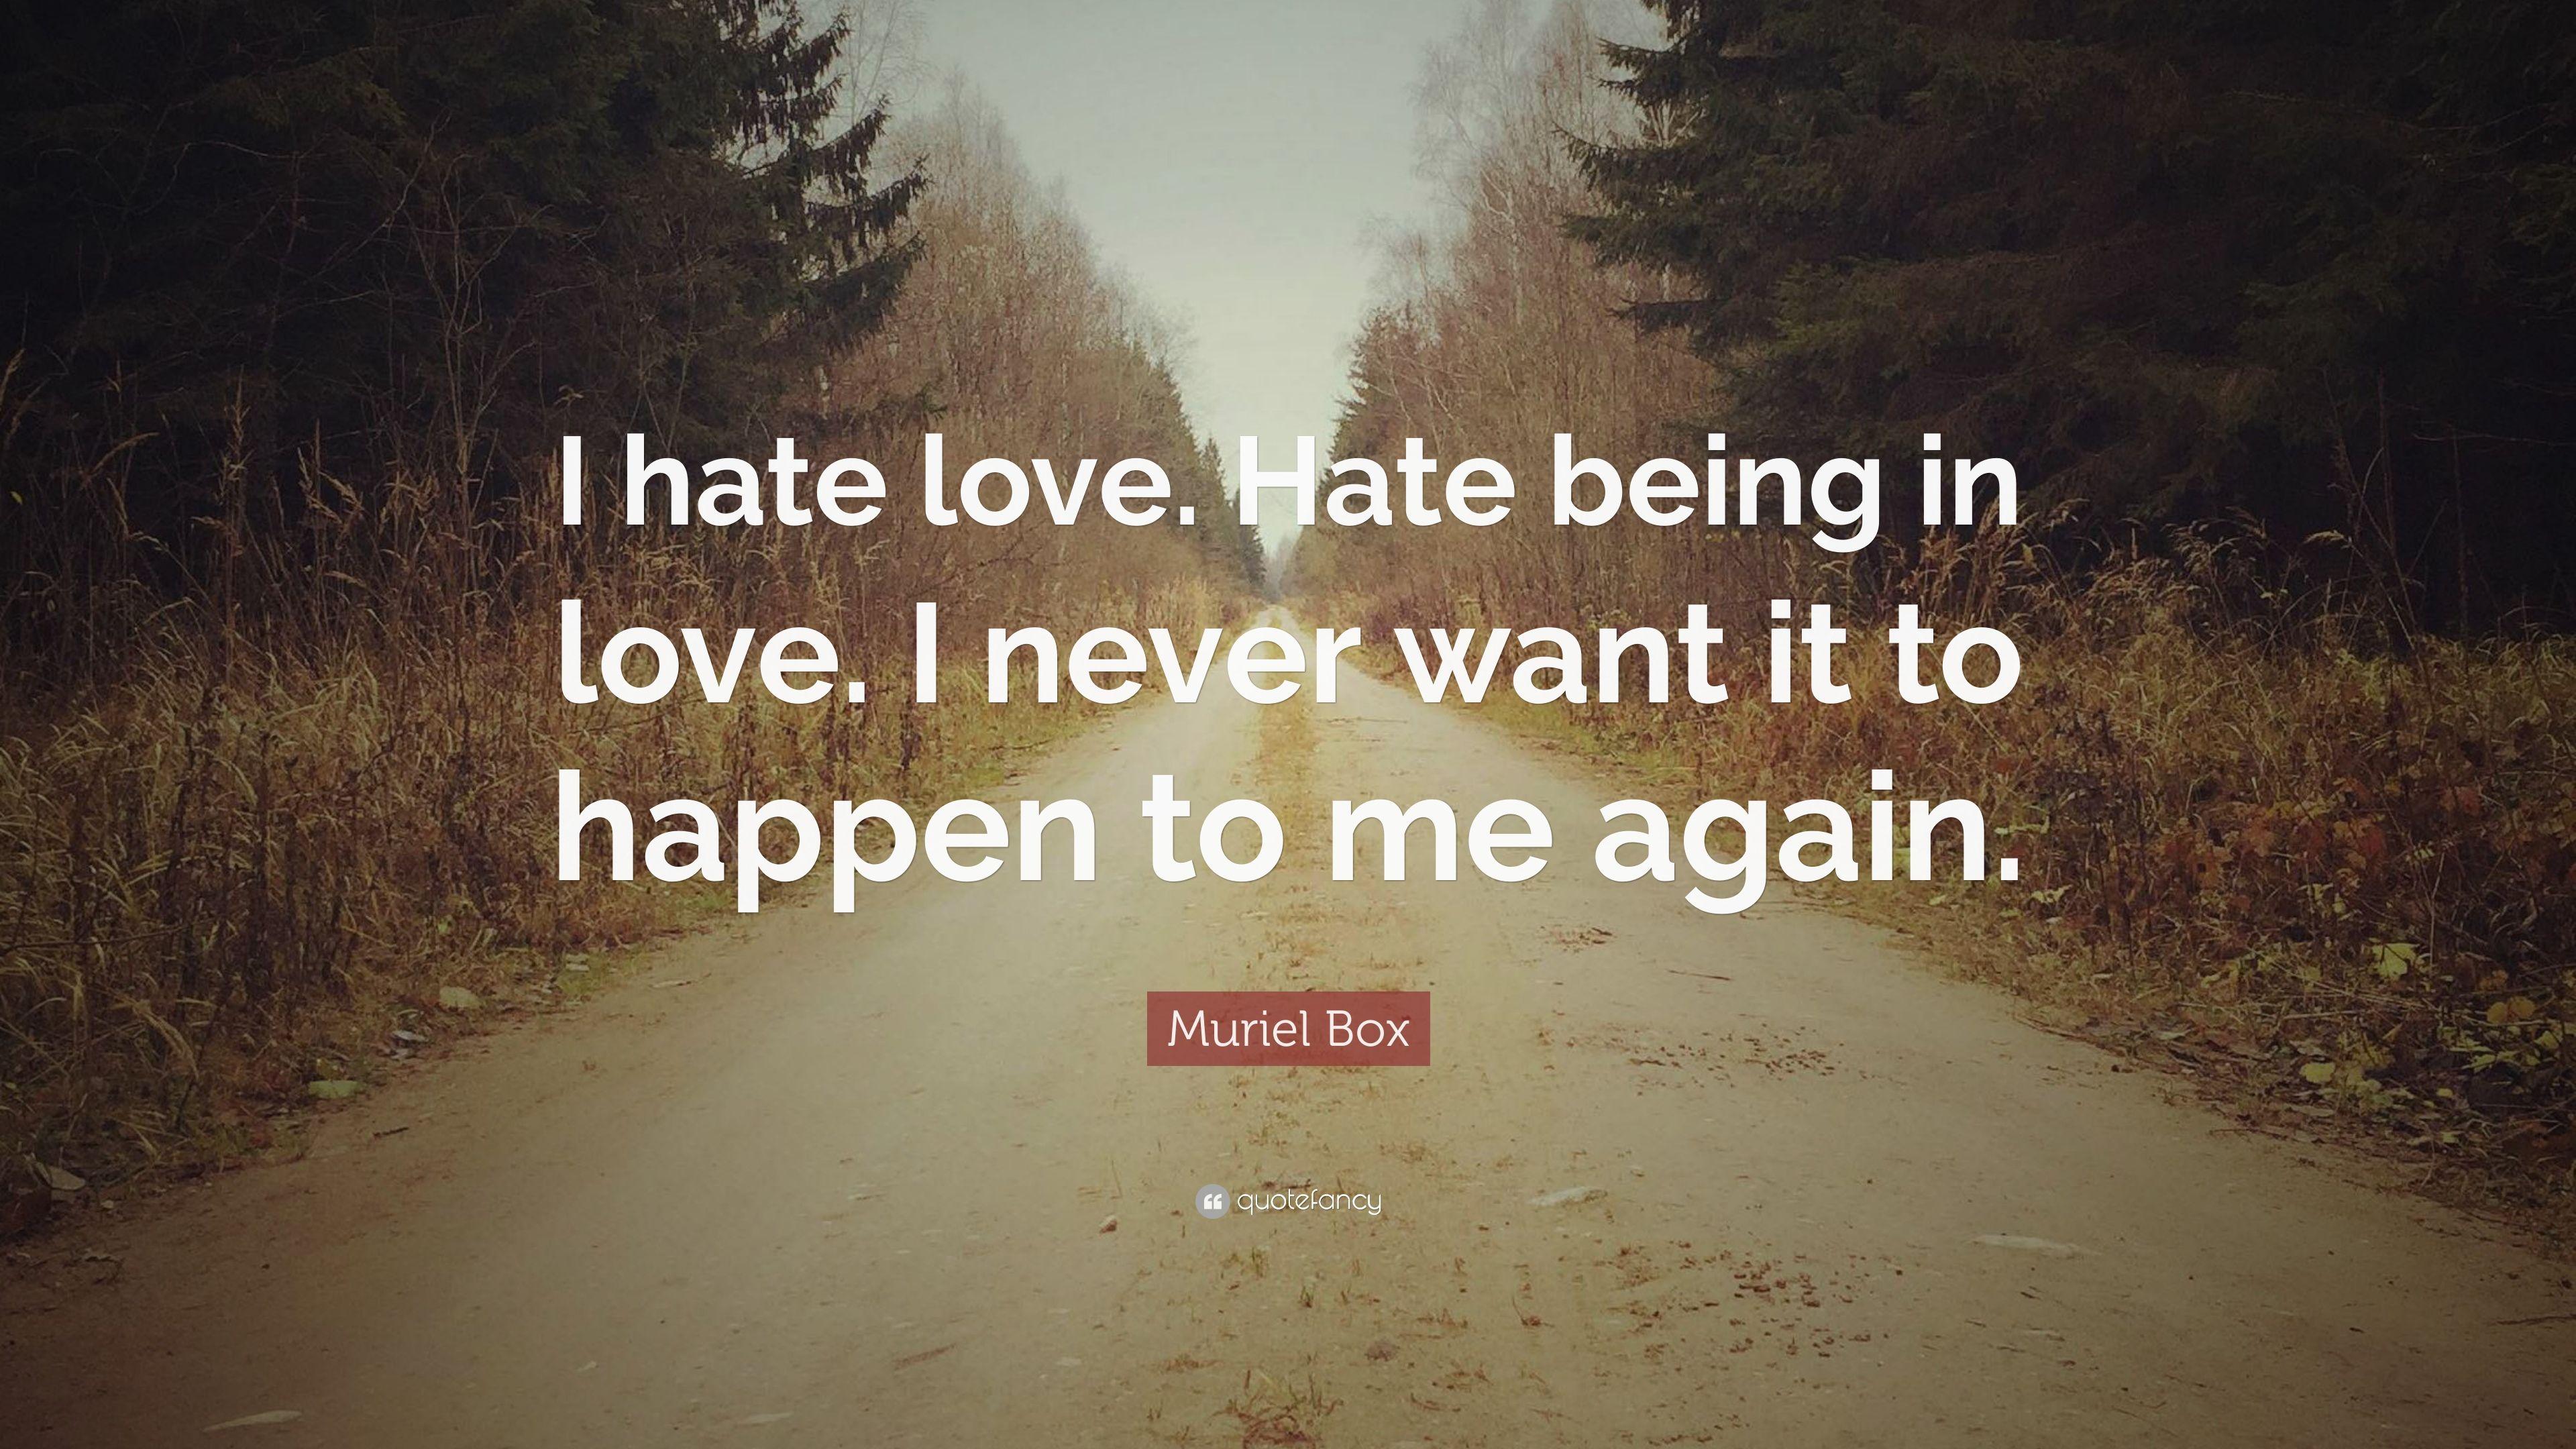 Muriel Box Quote: “I hate love. Hate being in love. I never want it to happen